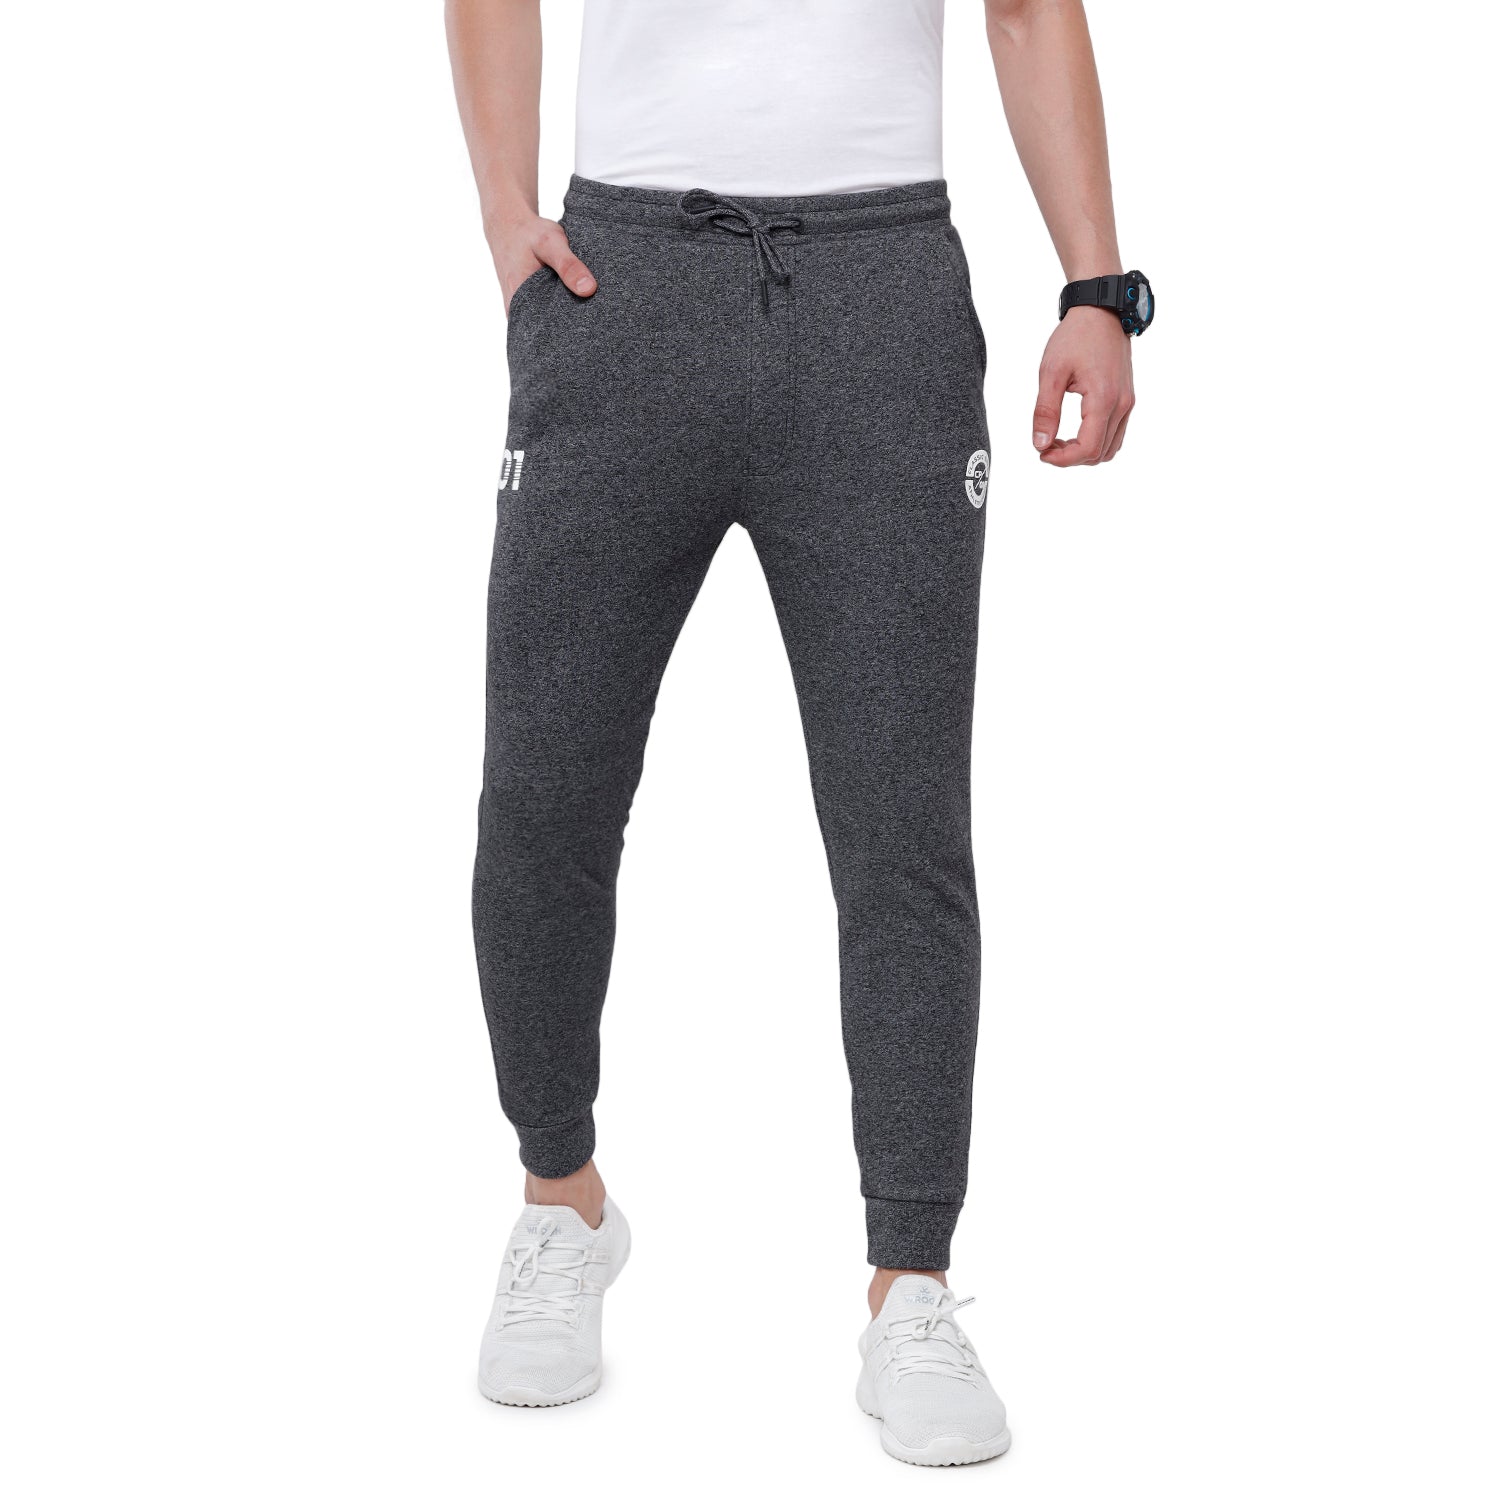 Classic Polo Men's Black Solid Mélange Slim Fit Sporty Jogger Pant - Gioz-04 C Track Pants Classic Polo 